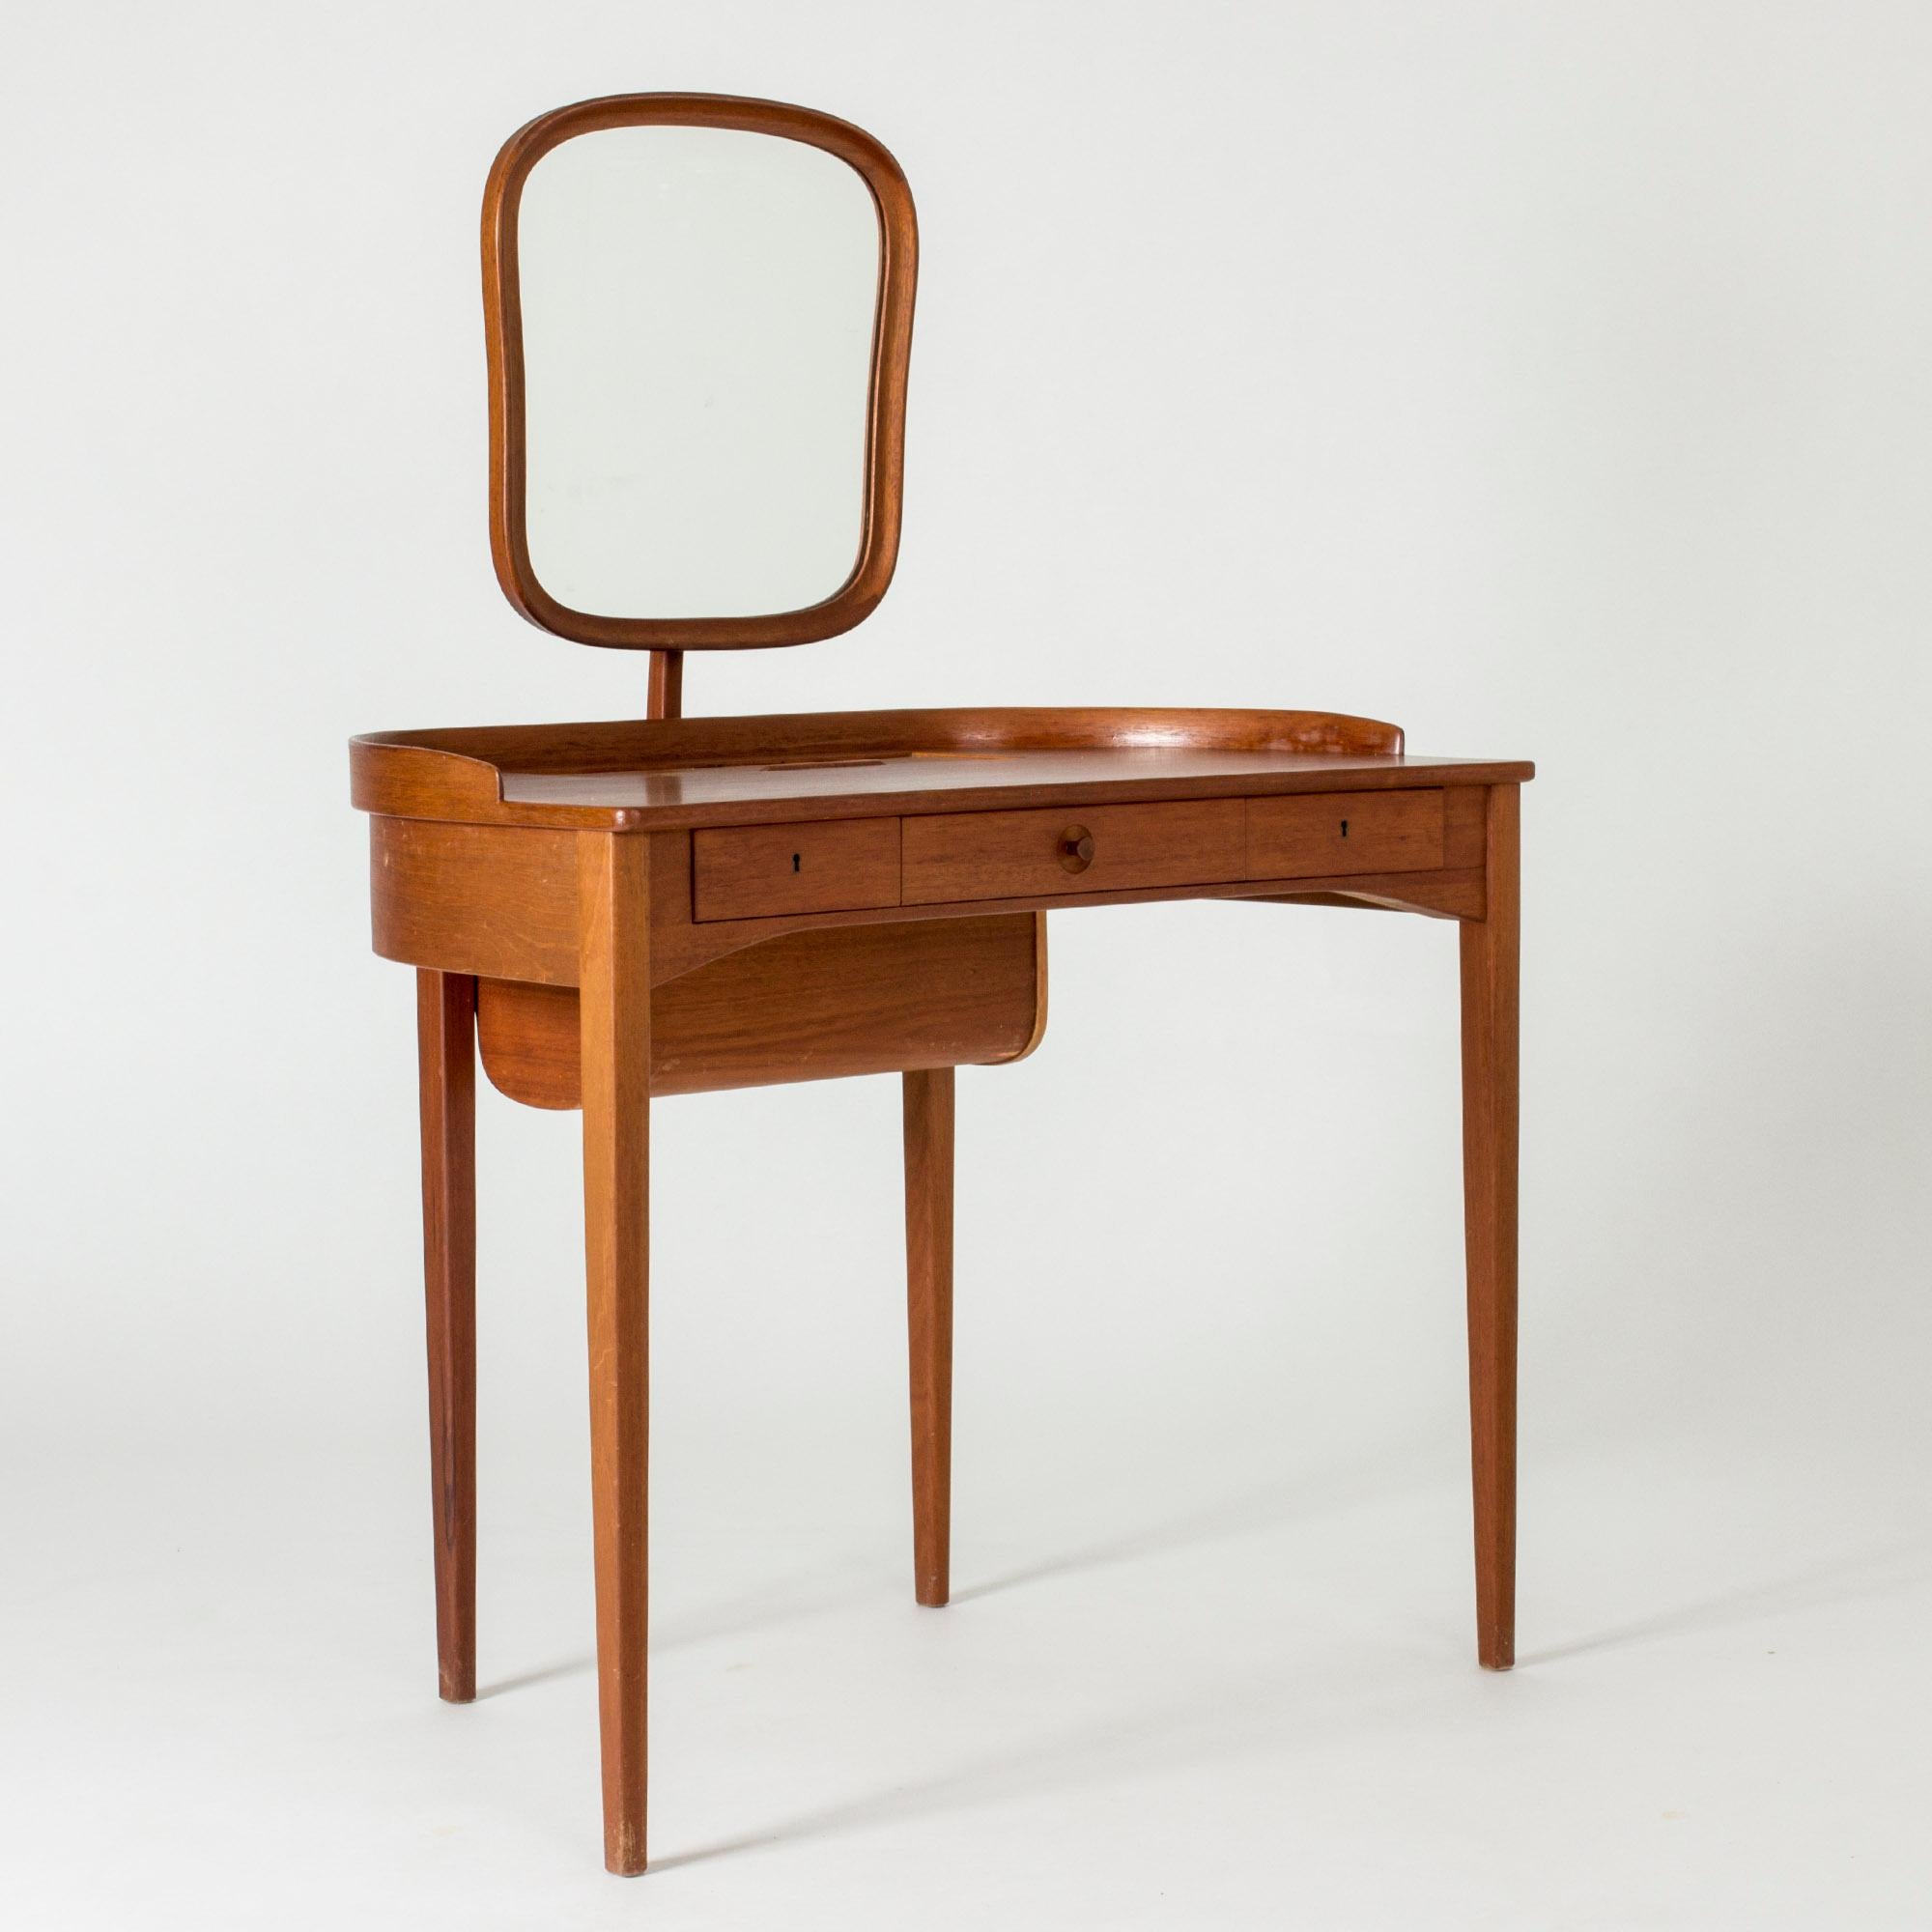 Beautiful “Birgitta” dressing table by Carl Malmsten, made from teak. Neat, curved design. Submerged drawer in the tabletop, covered by a jalousie door.